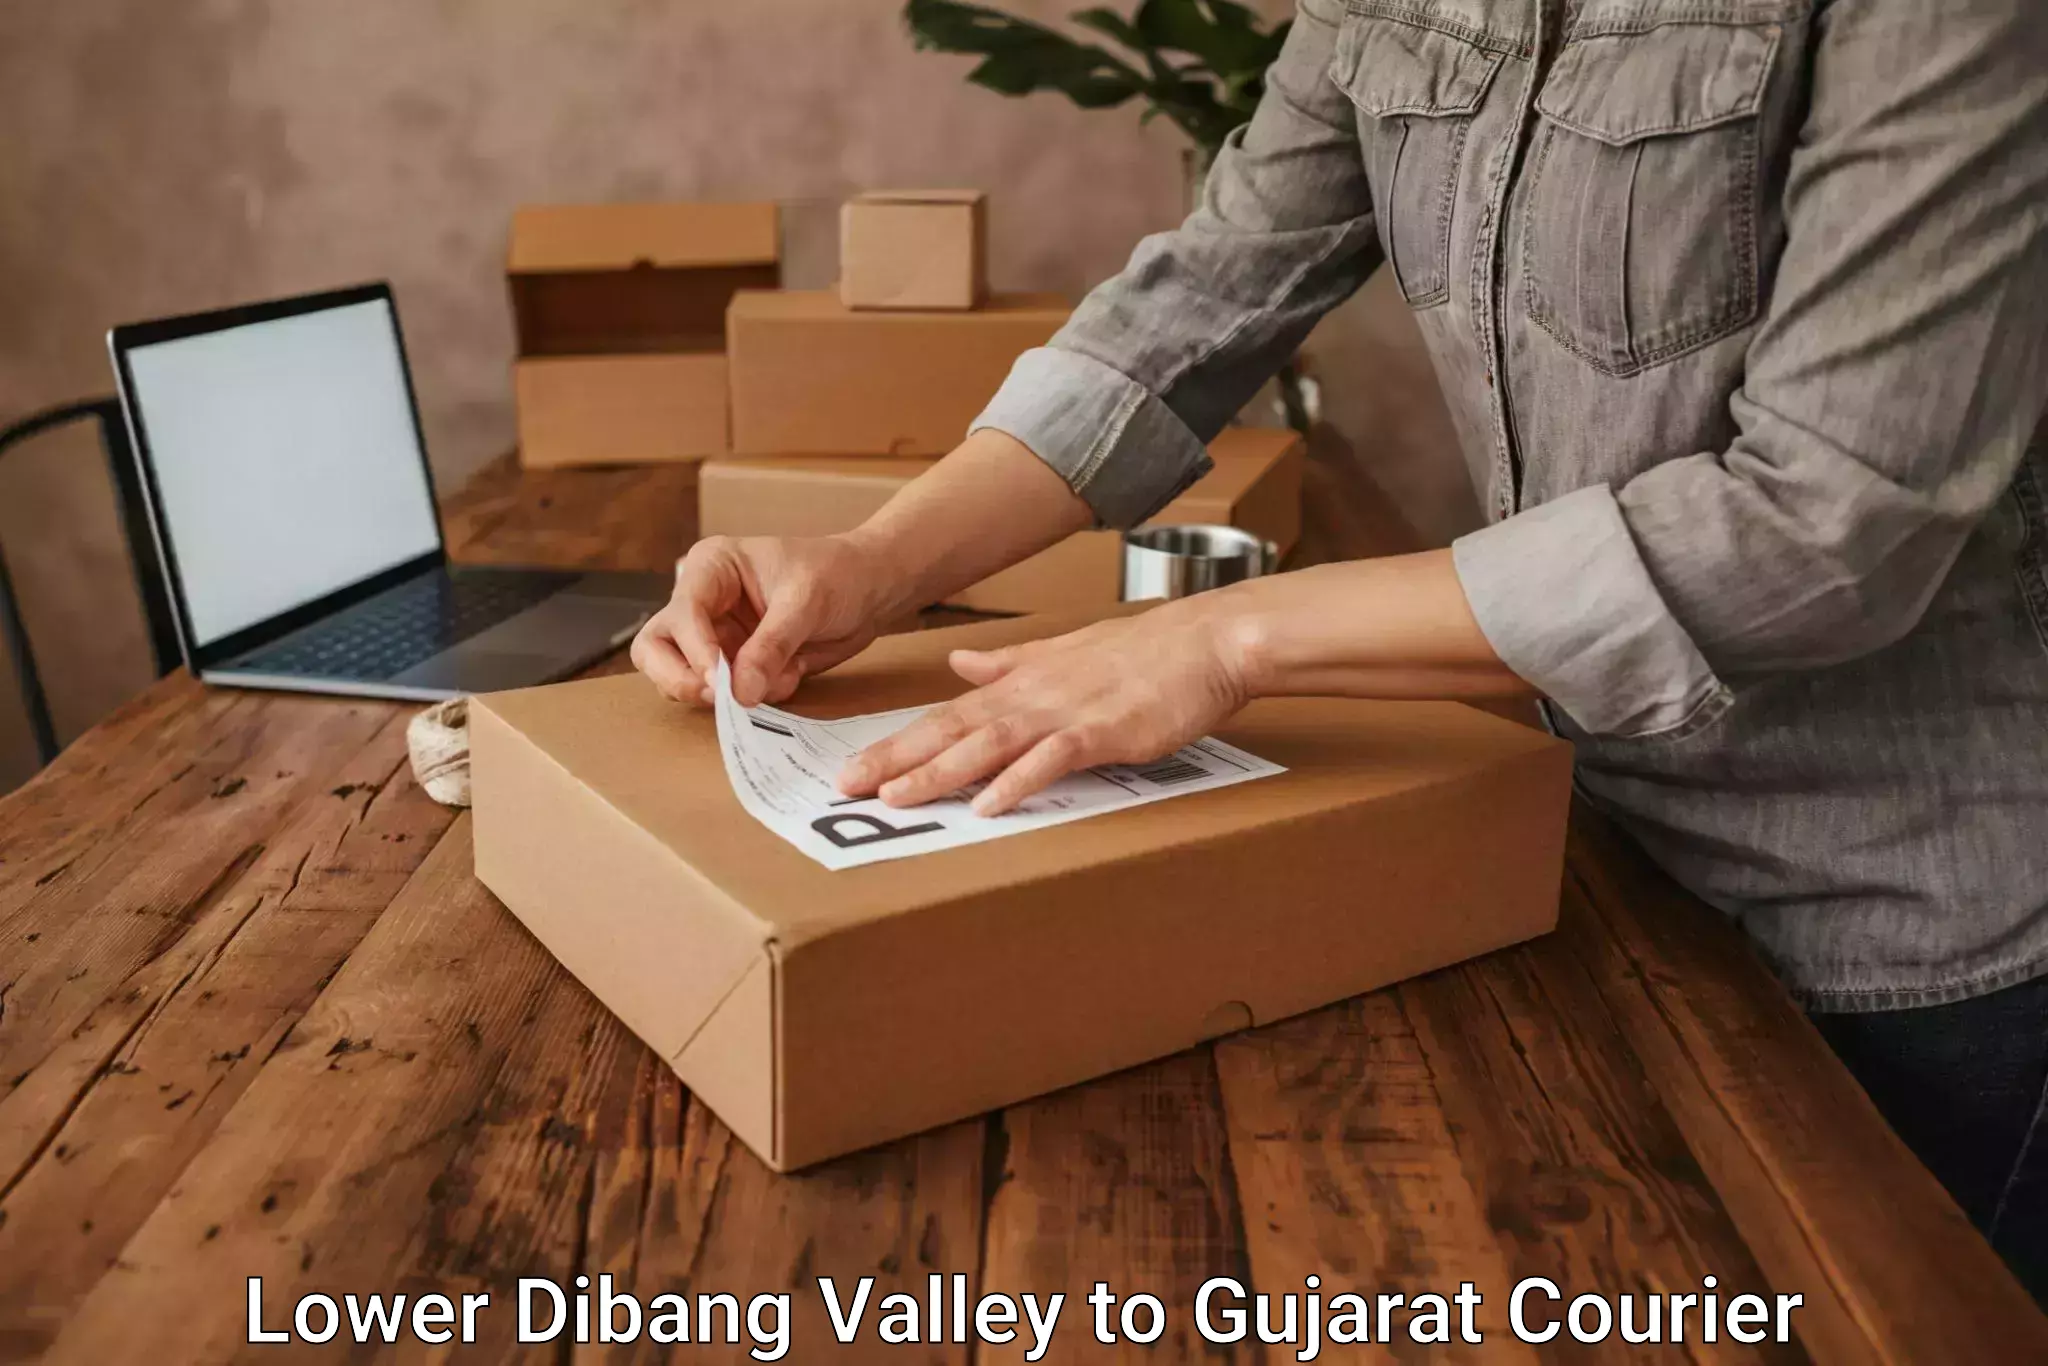 Reliable delivery network Lower Dibang Valley to Gujarat